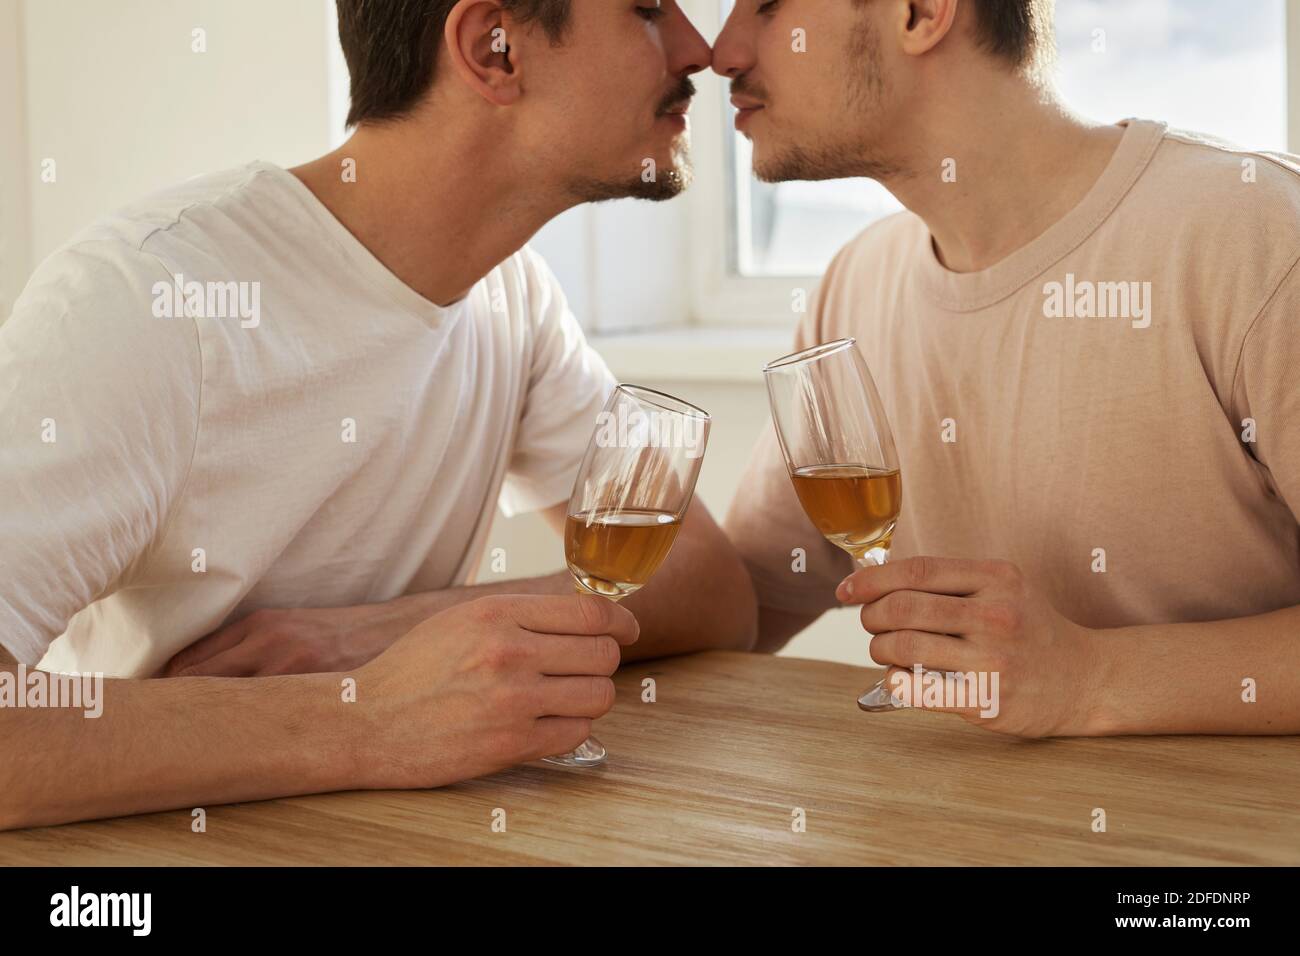 Gay couple of men drink wine from glasses and kiss at home Stock Photo